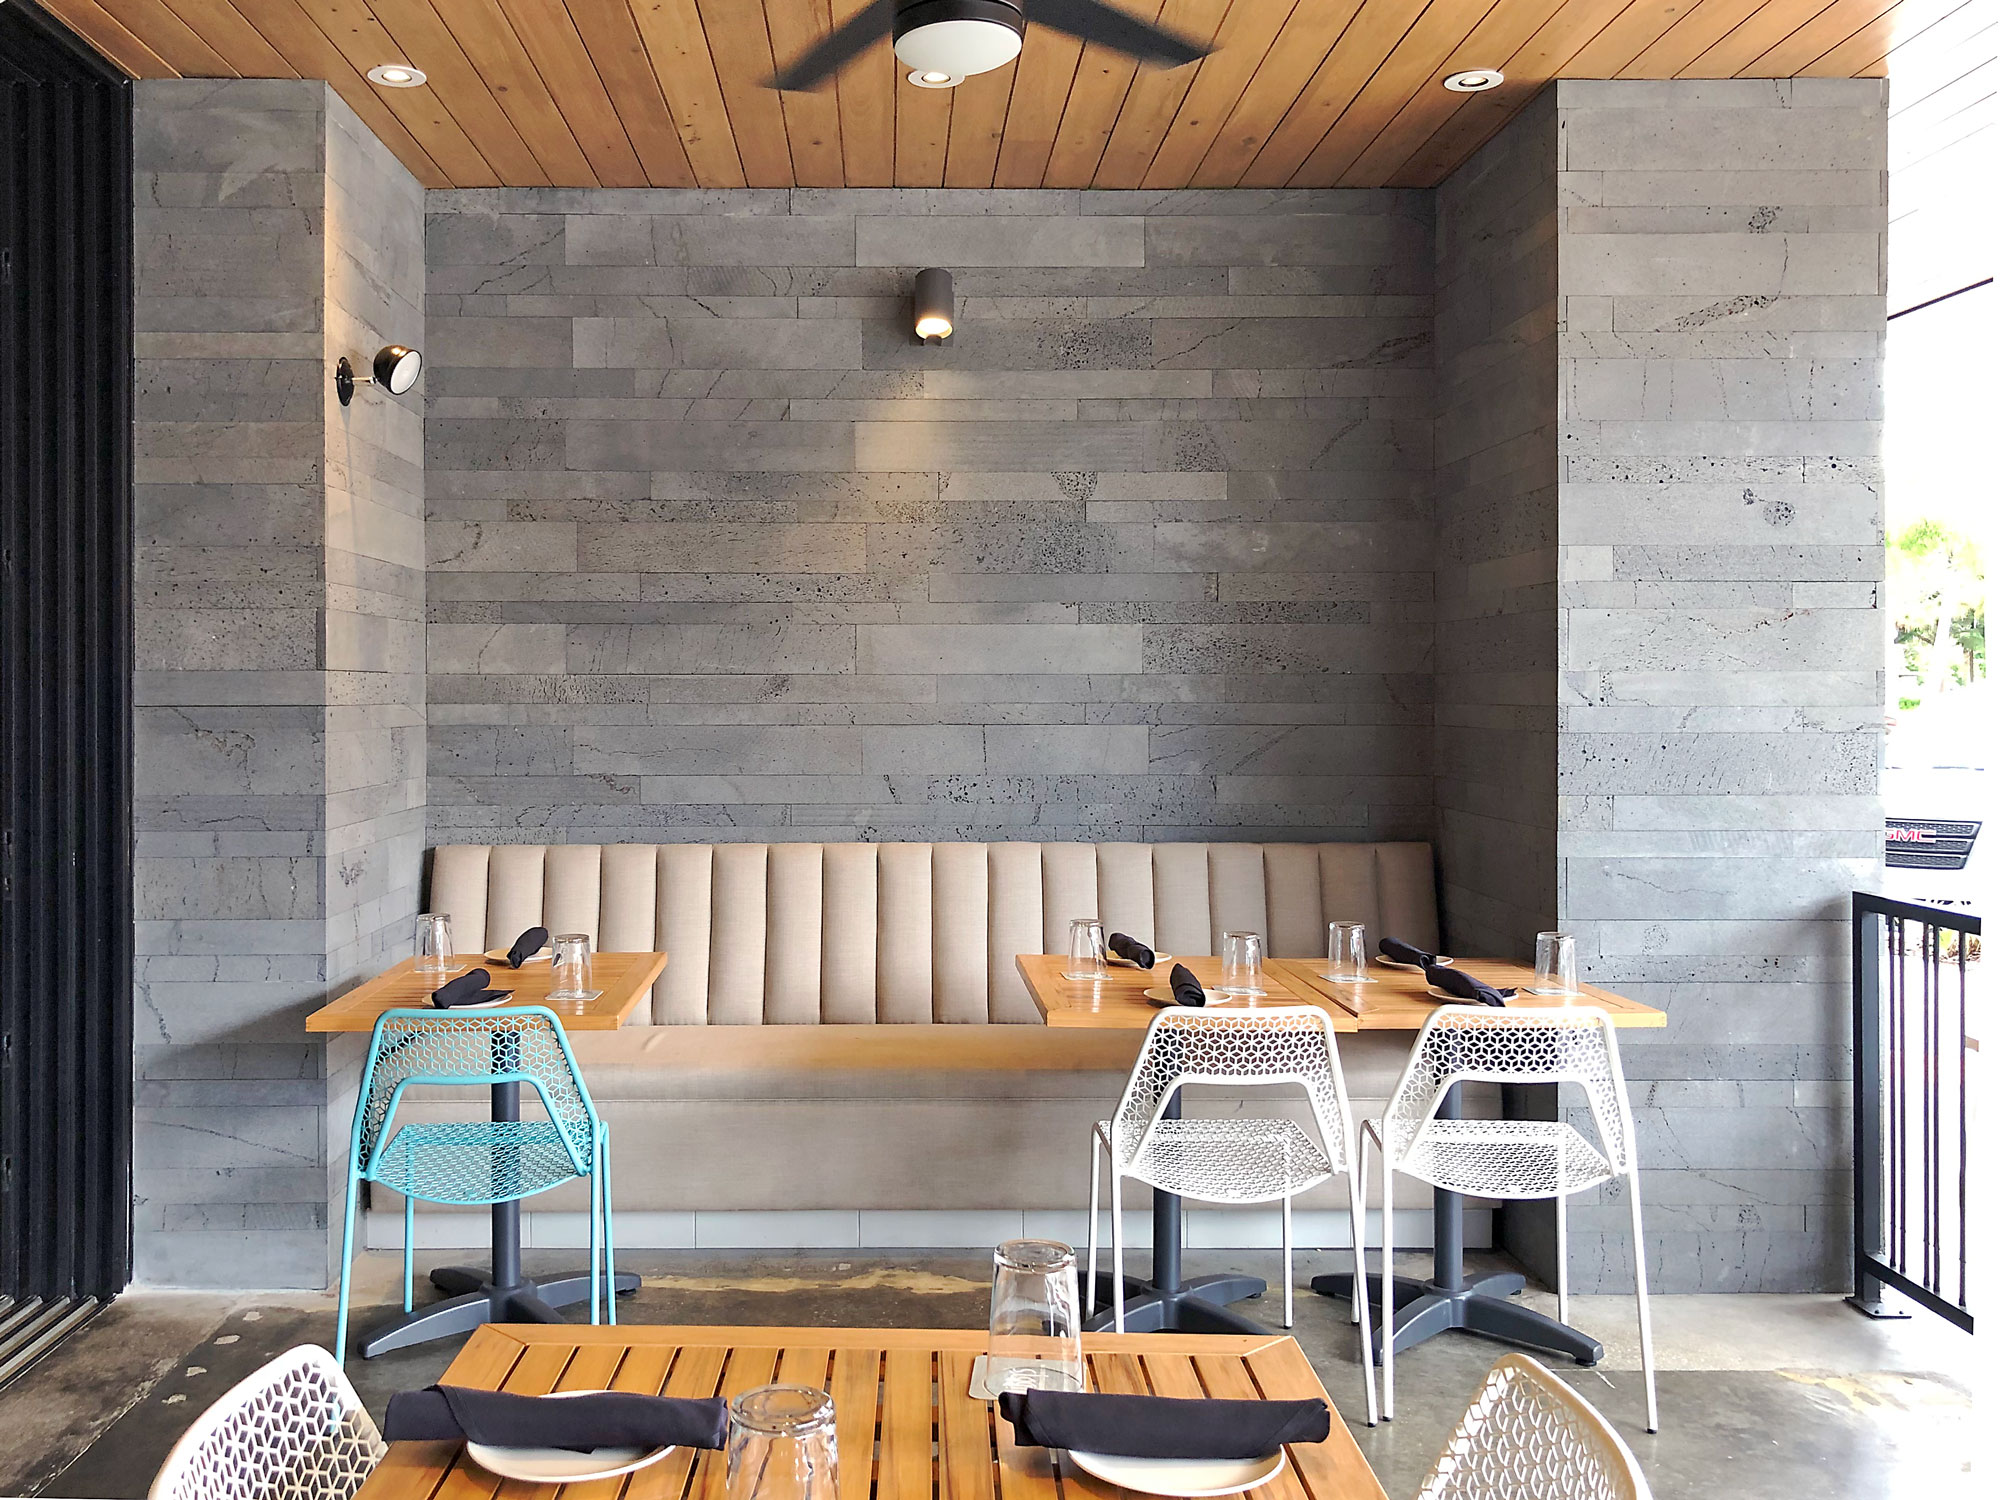 Norstone Planc large format tile in Platinum Lavastone surrounding a bench seat at a restaurant in Sarasota, FL